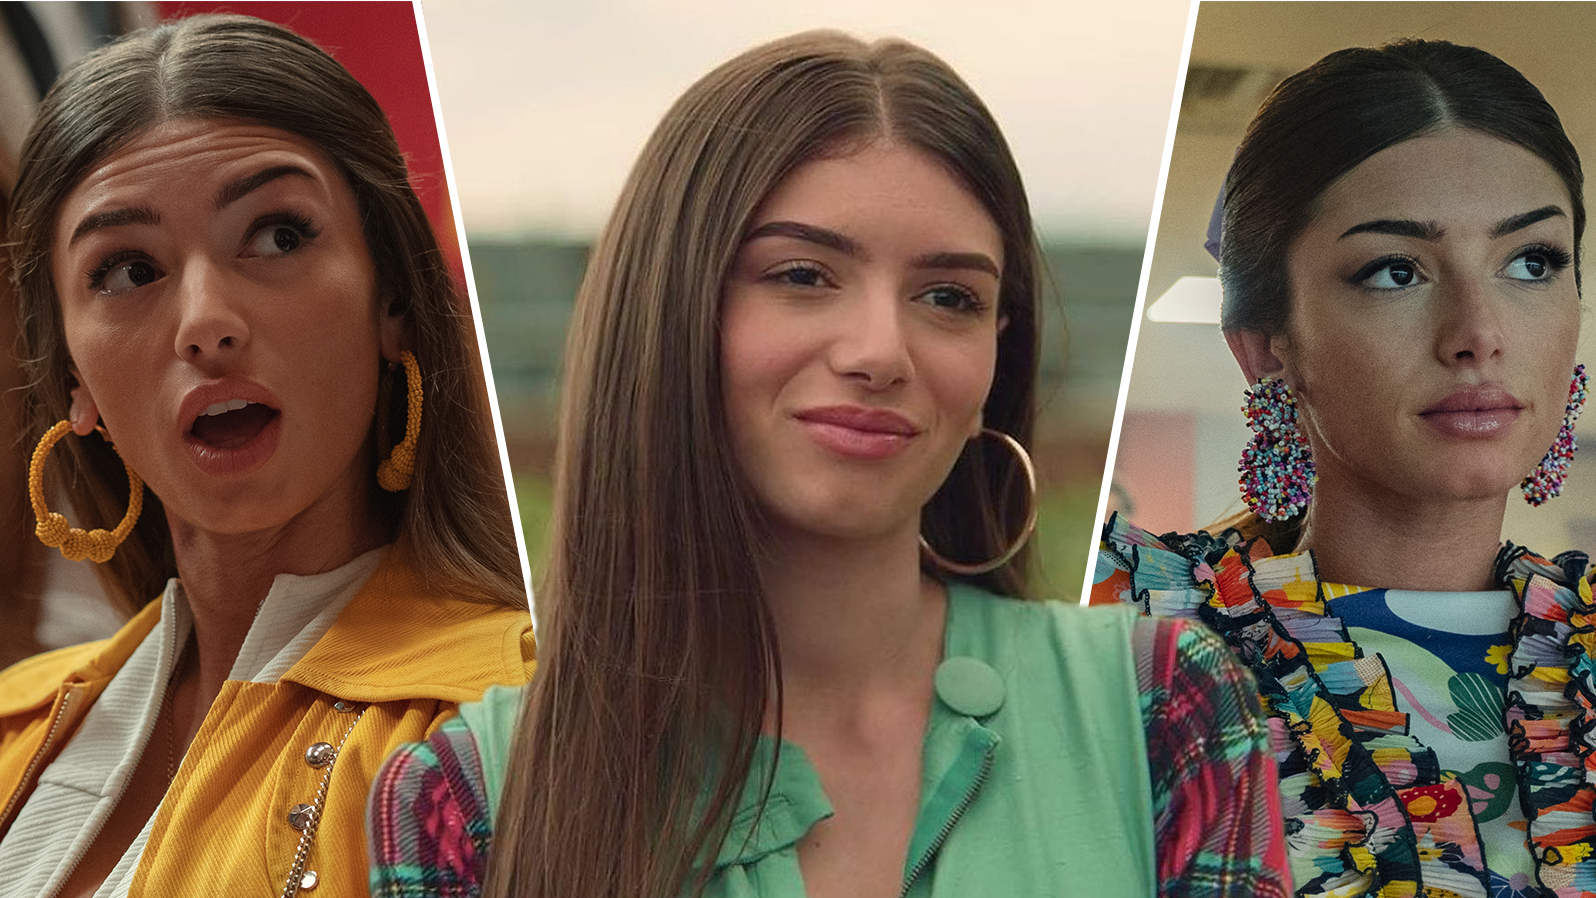 Jacqueline Sexy Bf - Sex Education's Mimi Keene: Who is the actress that plays Ruby Matthews?